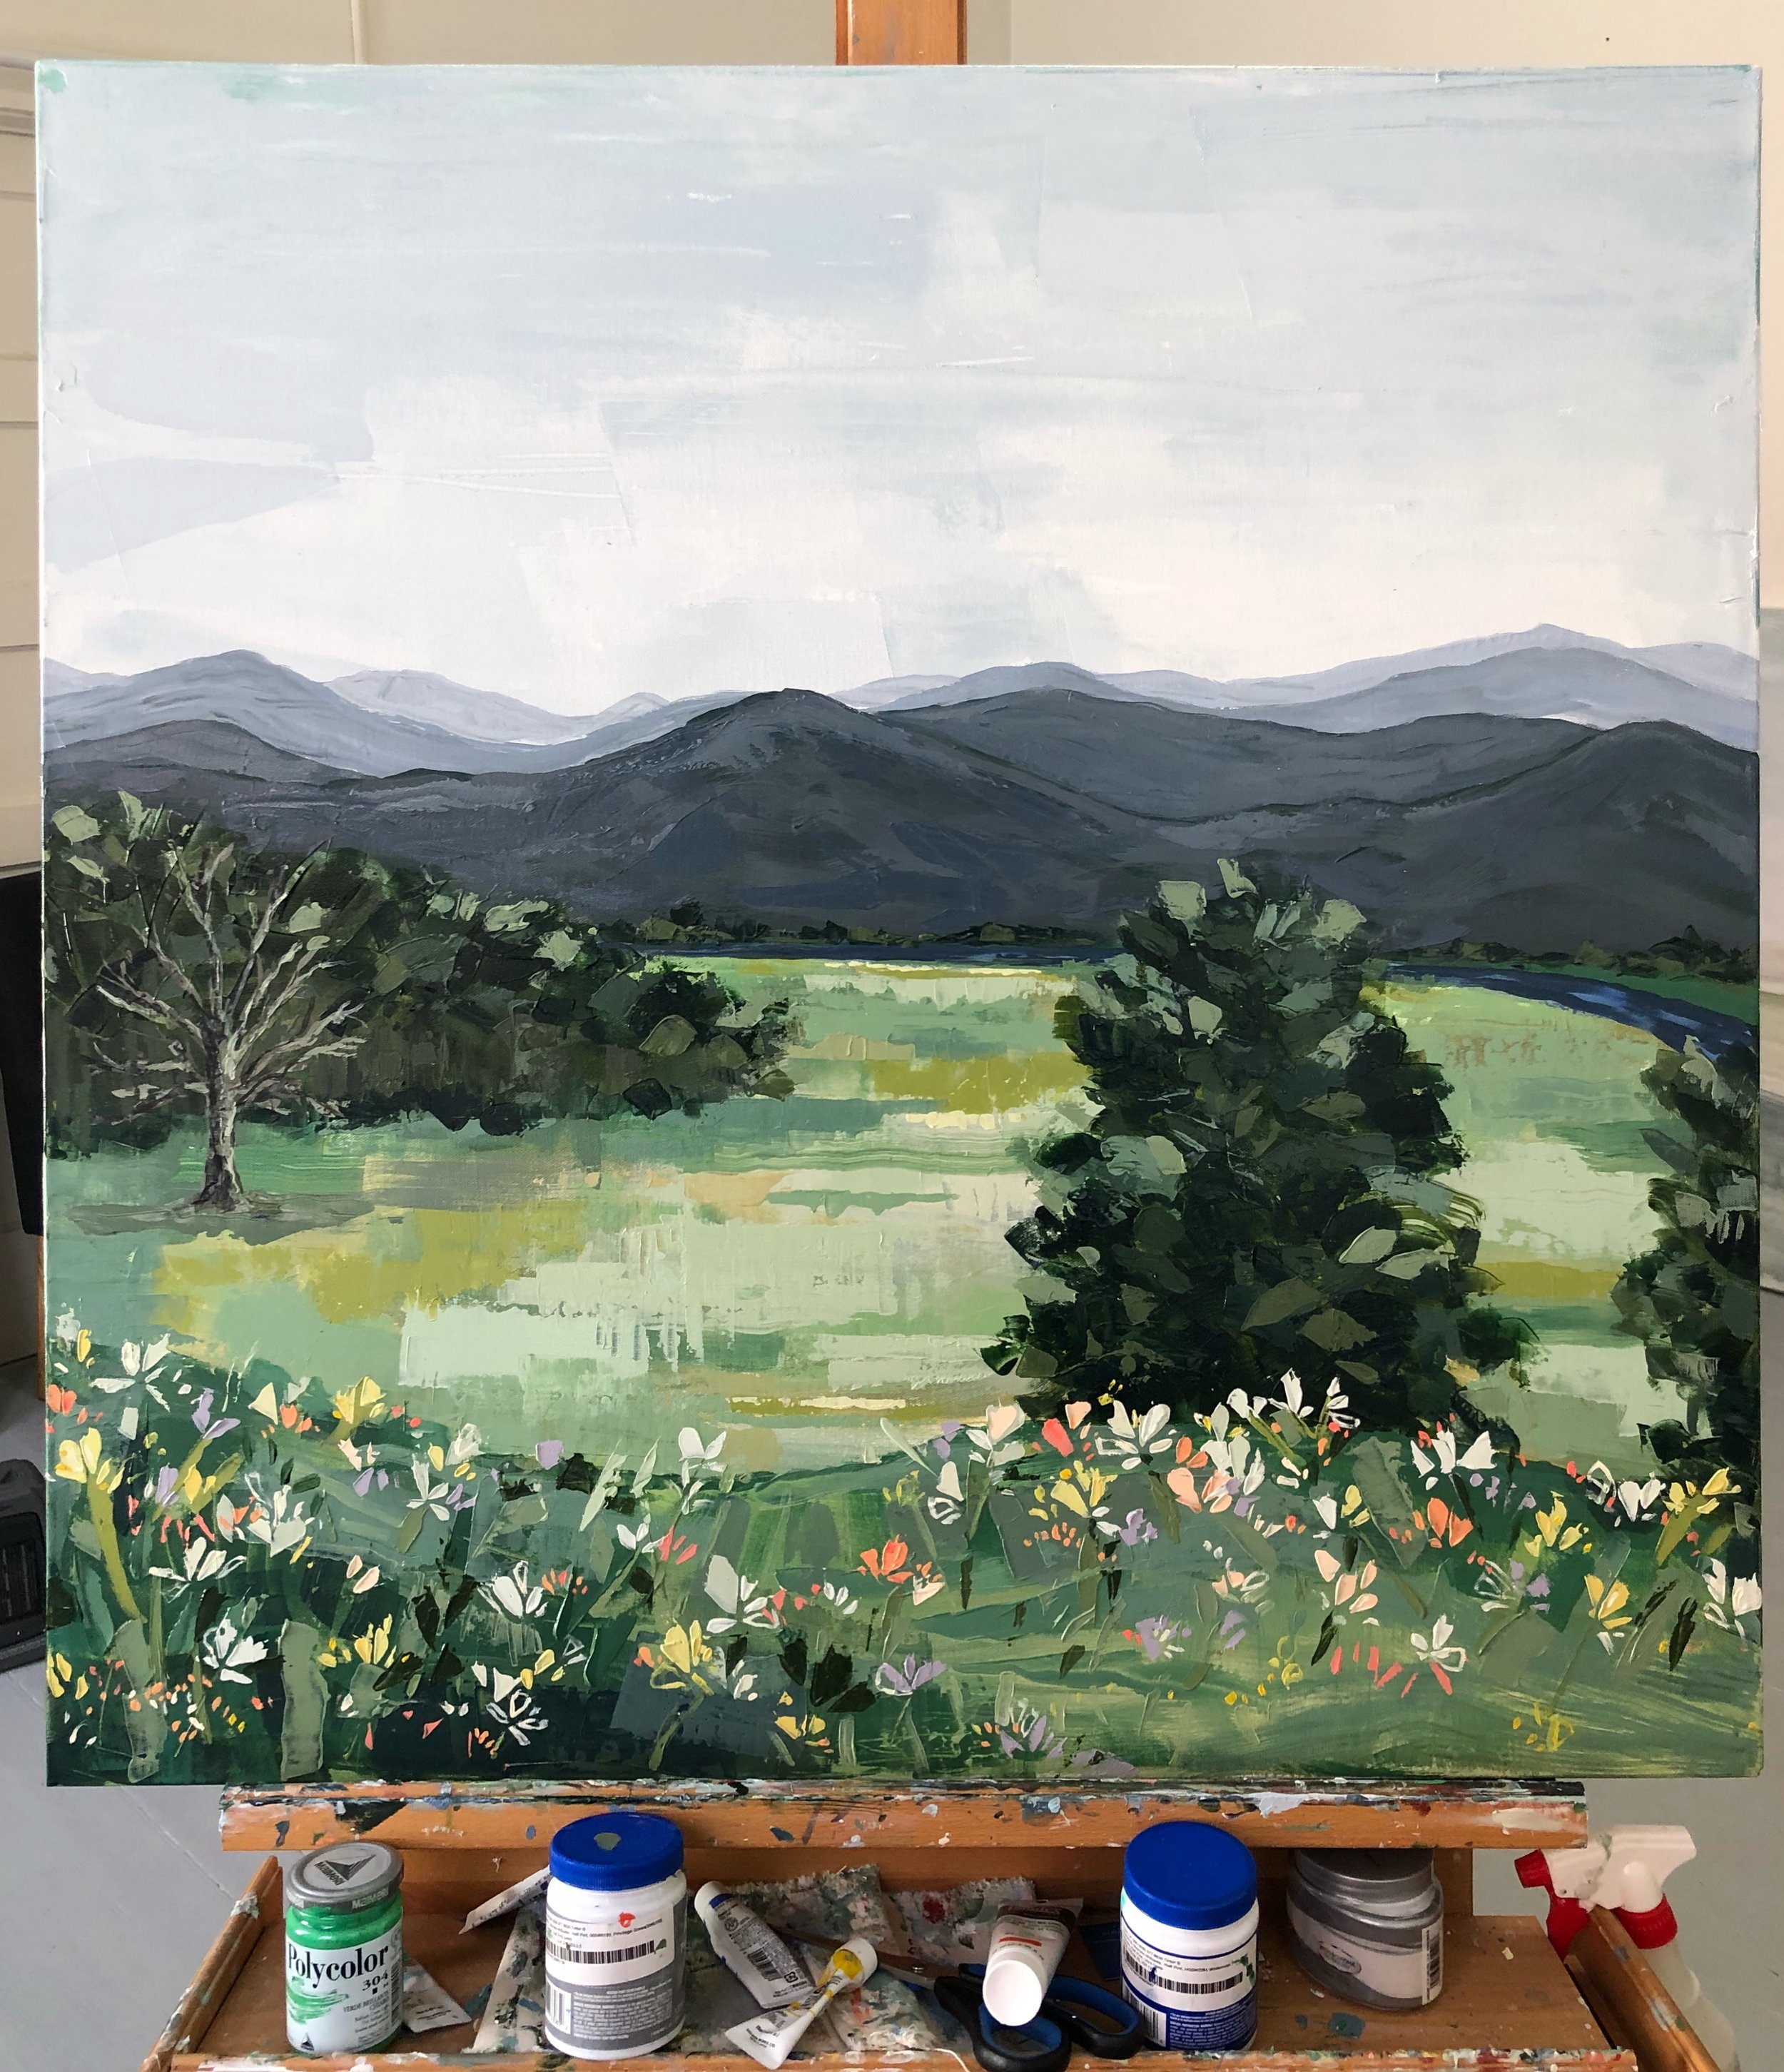  This was one my favorite commissions - I was able to meet and visit with a wonderful family at their farm not far from me in NC, and was commissioned to paint the view from the back porch looking over the farm. 